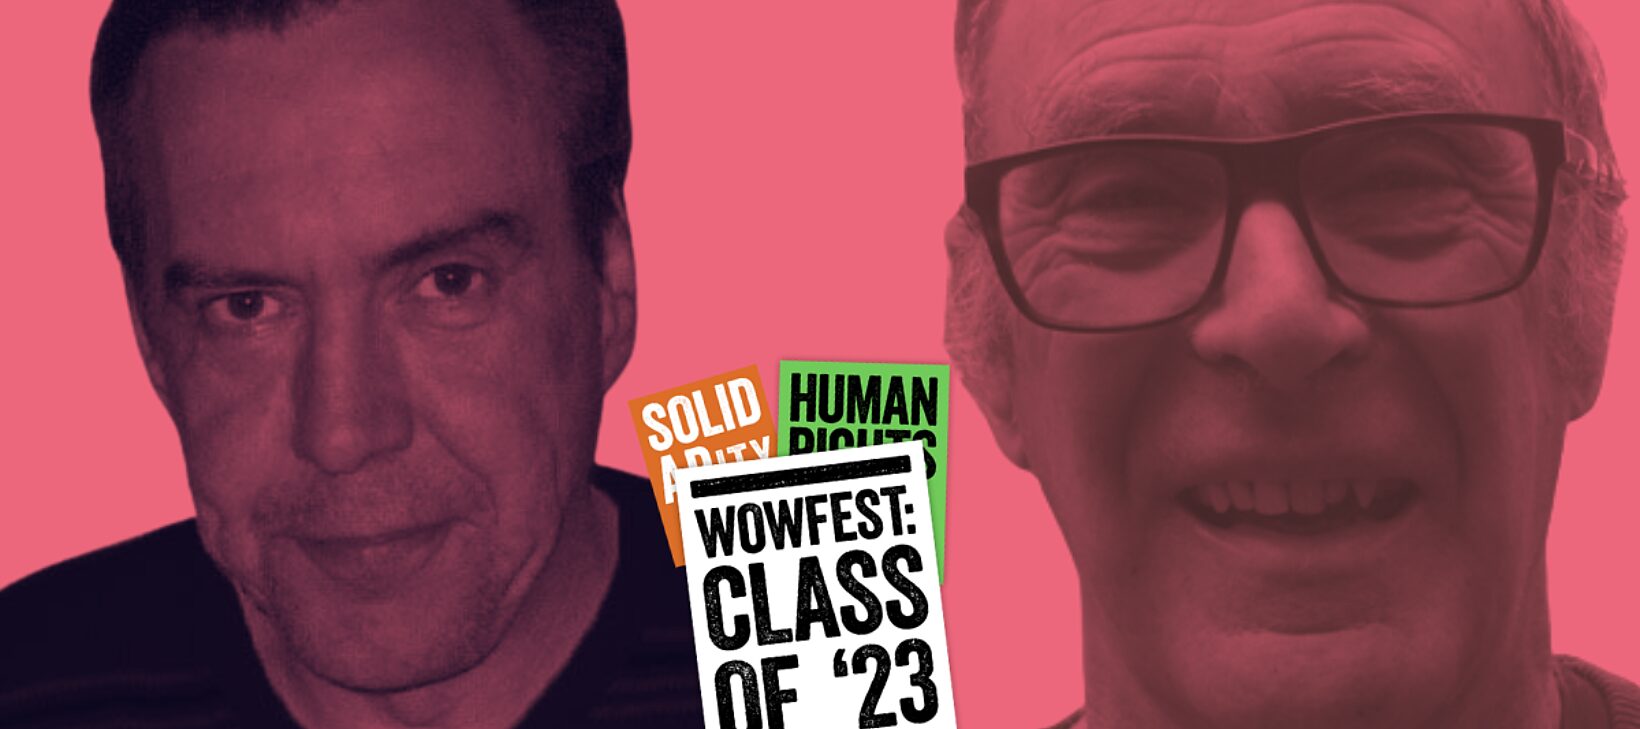 Image shows two people looking at the camera with a pink background.  A logo in the middle of the image says 'WOWFEST: Class of '23'